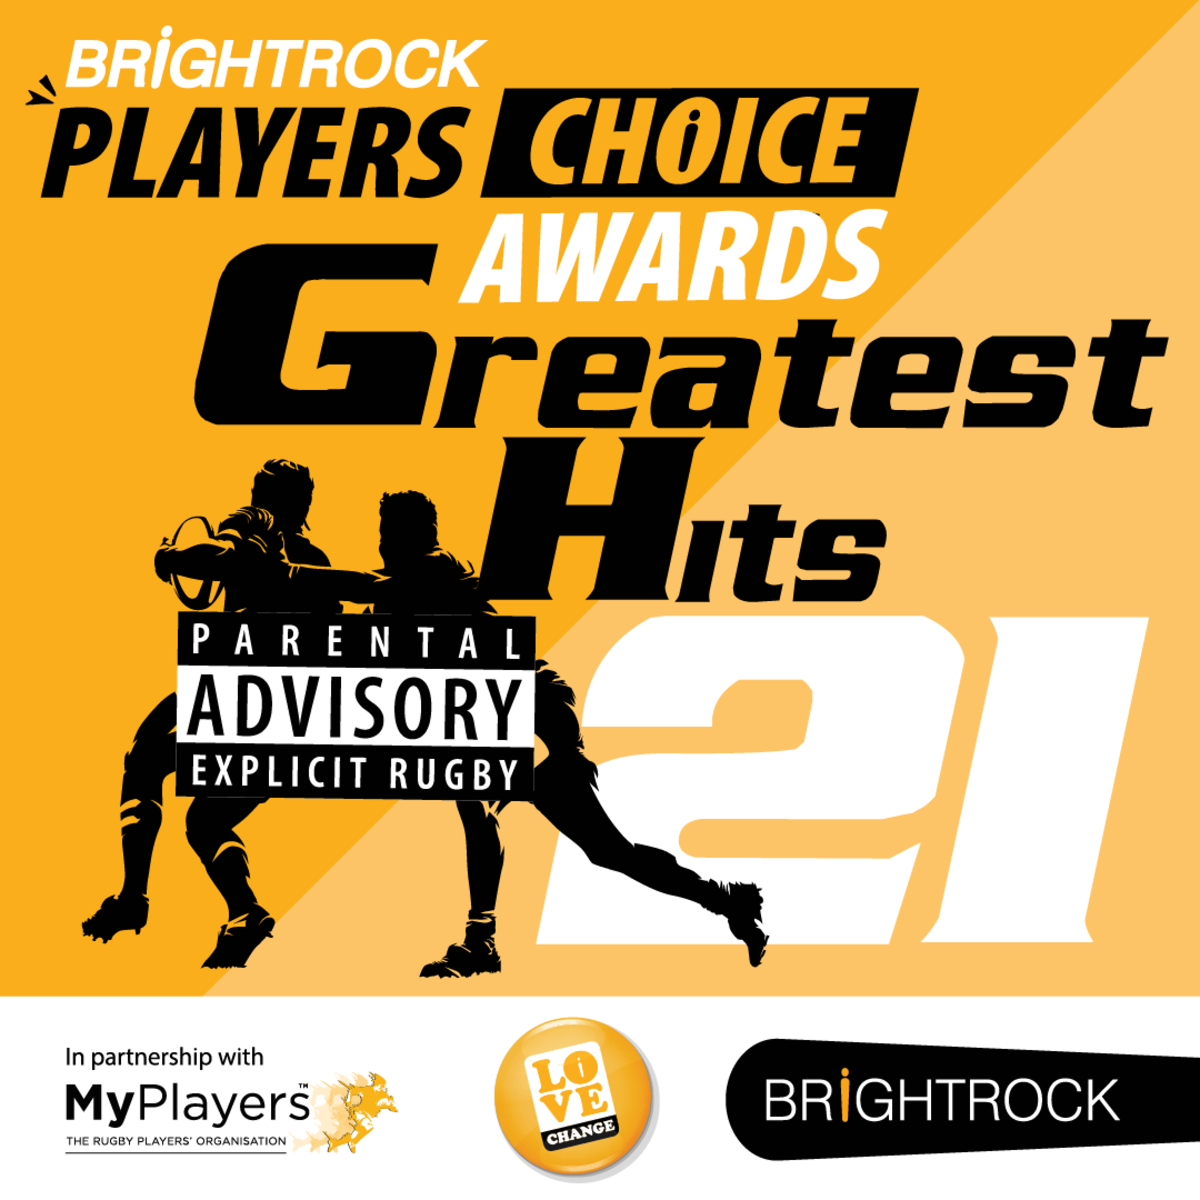 The BrightRock Players Choice Awards 2021 nominees